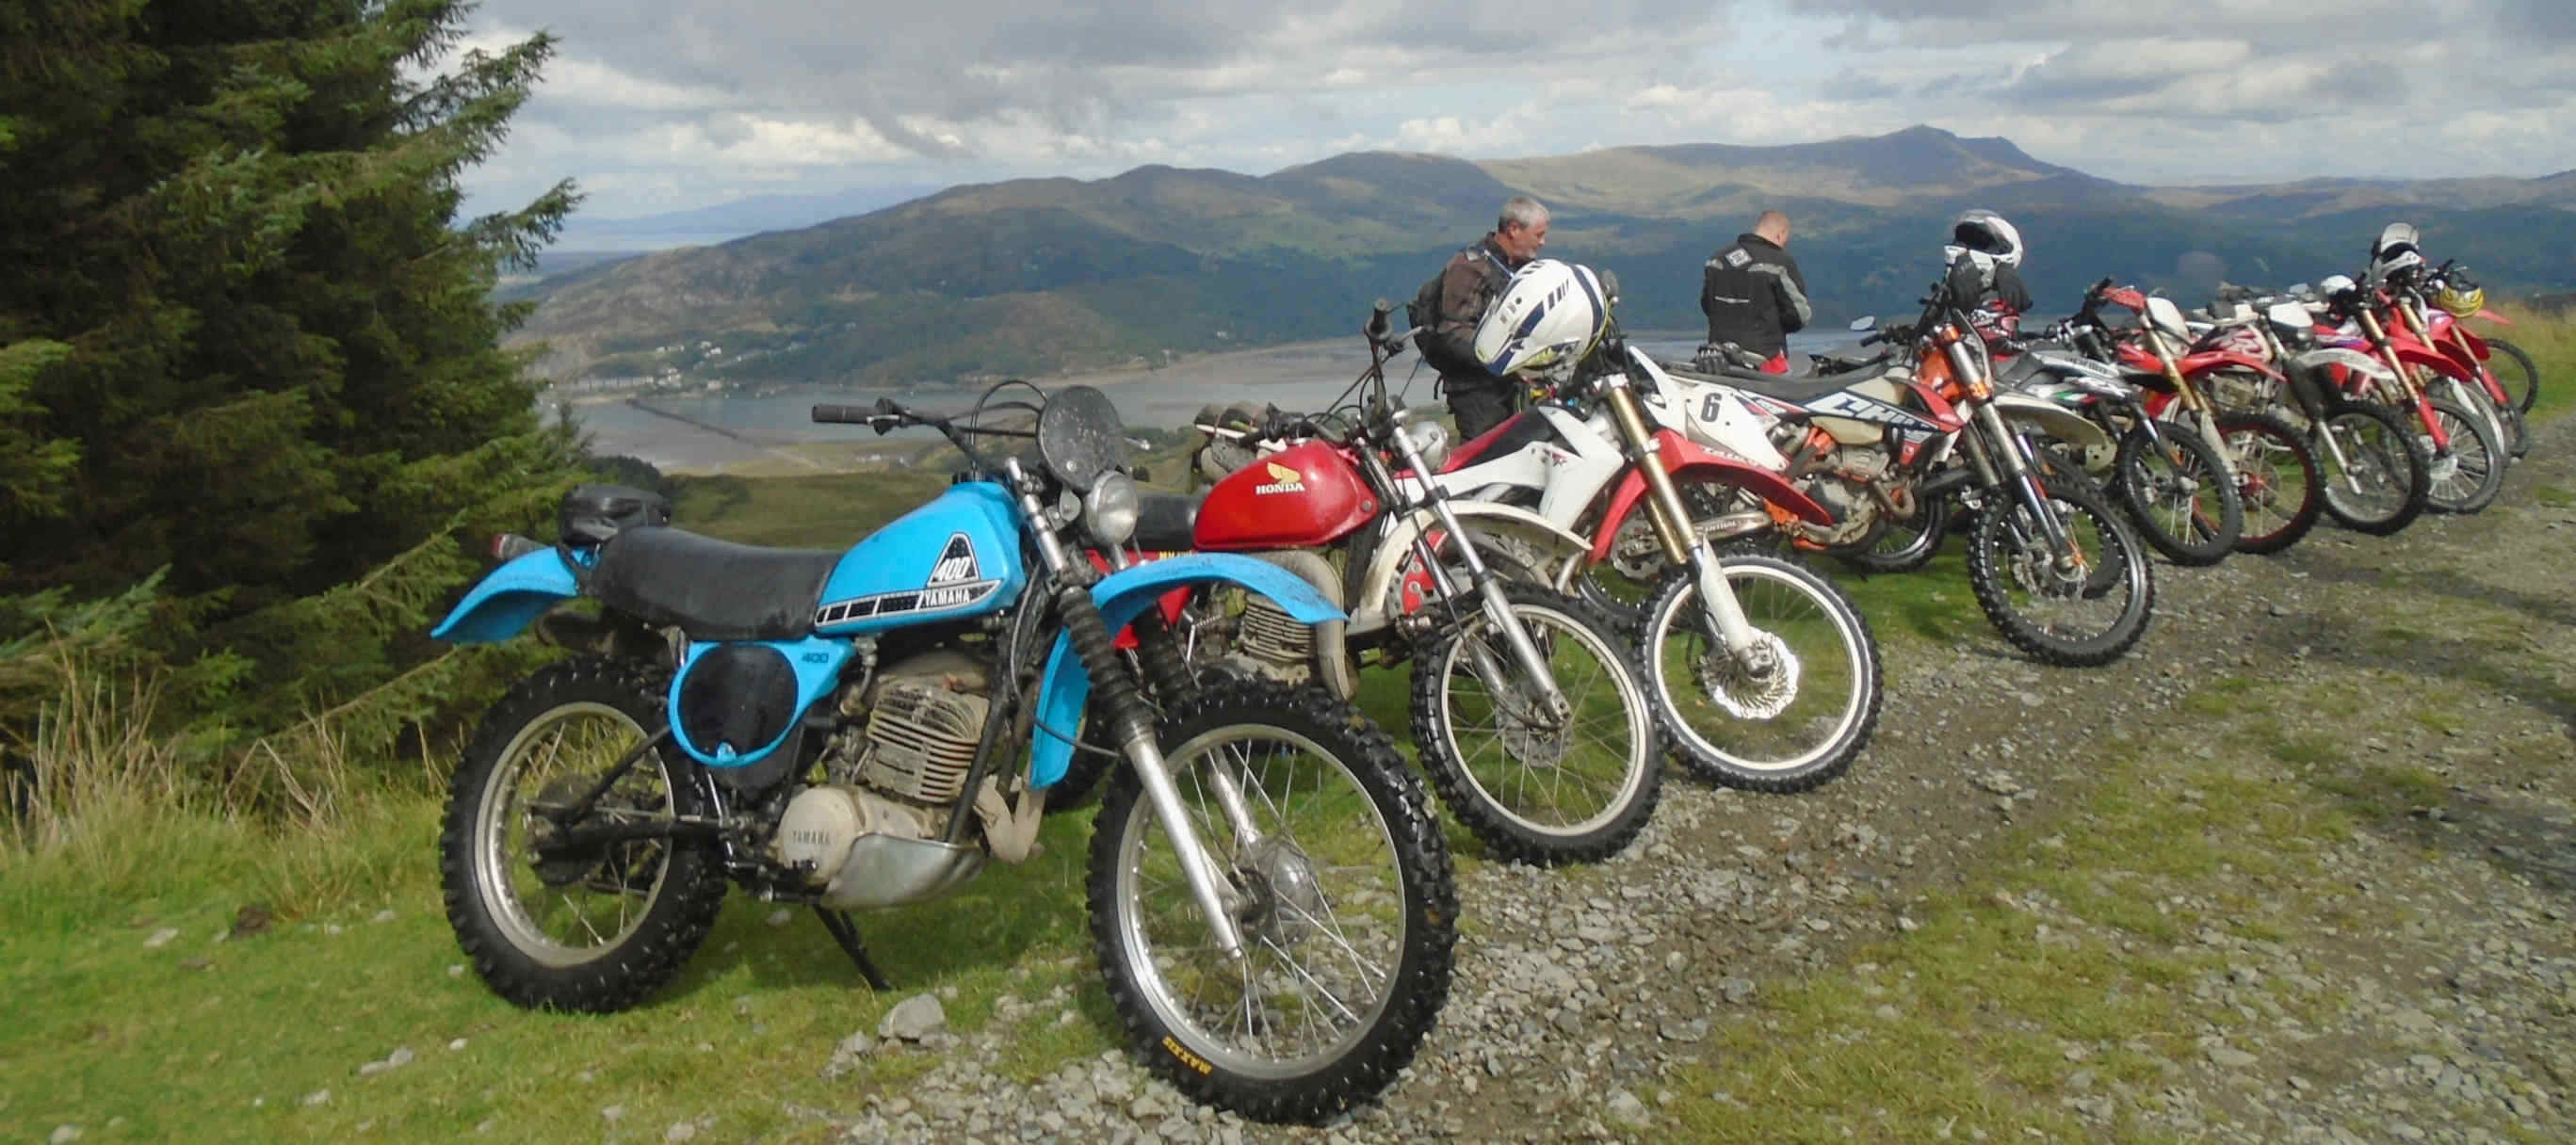 Scenic picture of trail bikes overlooking Mawddach Estuary